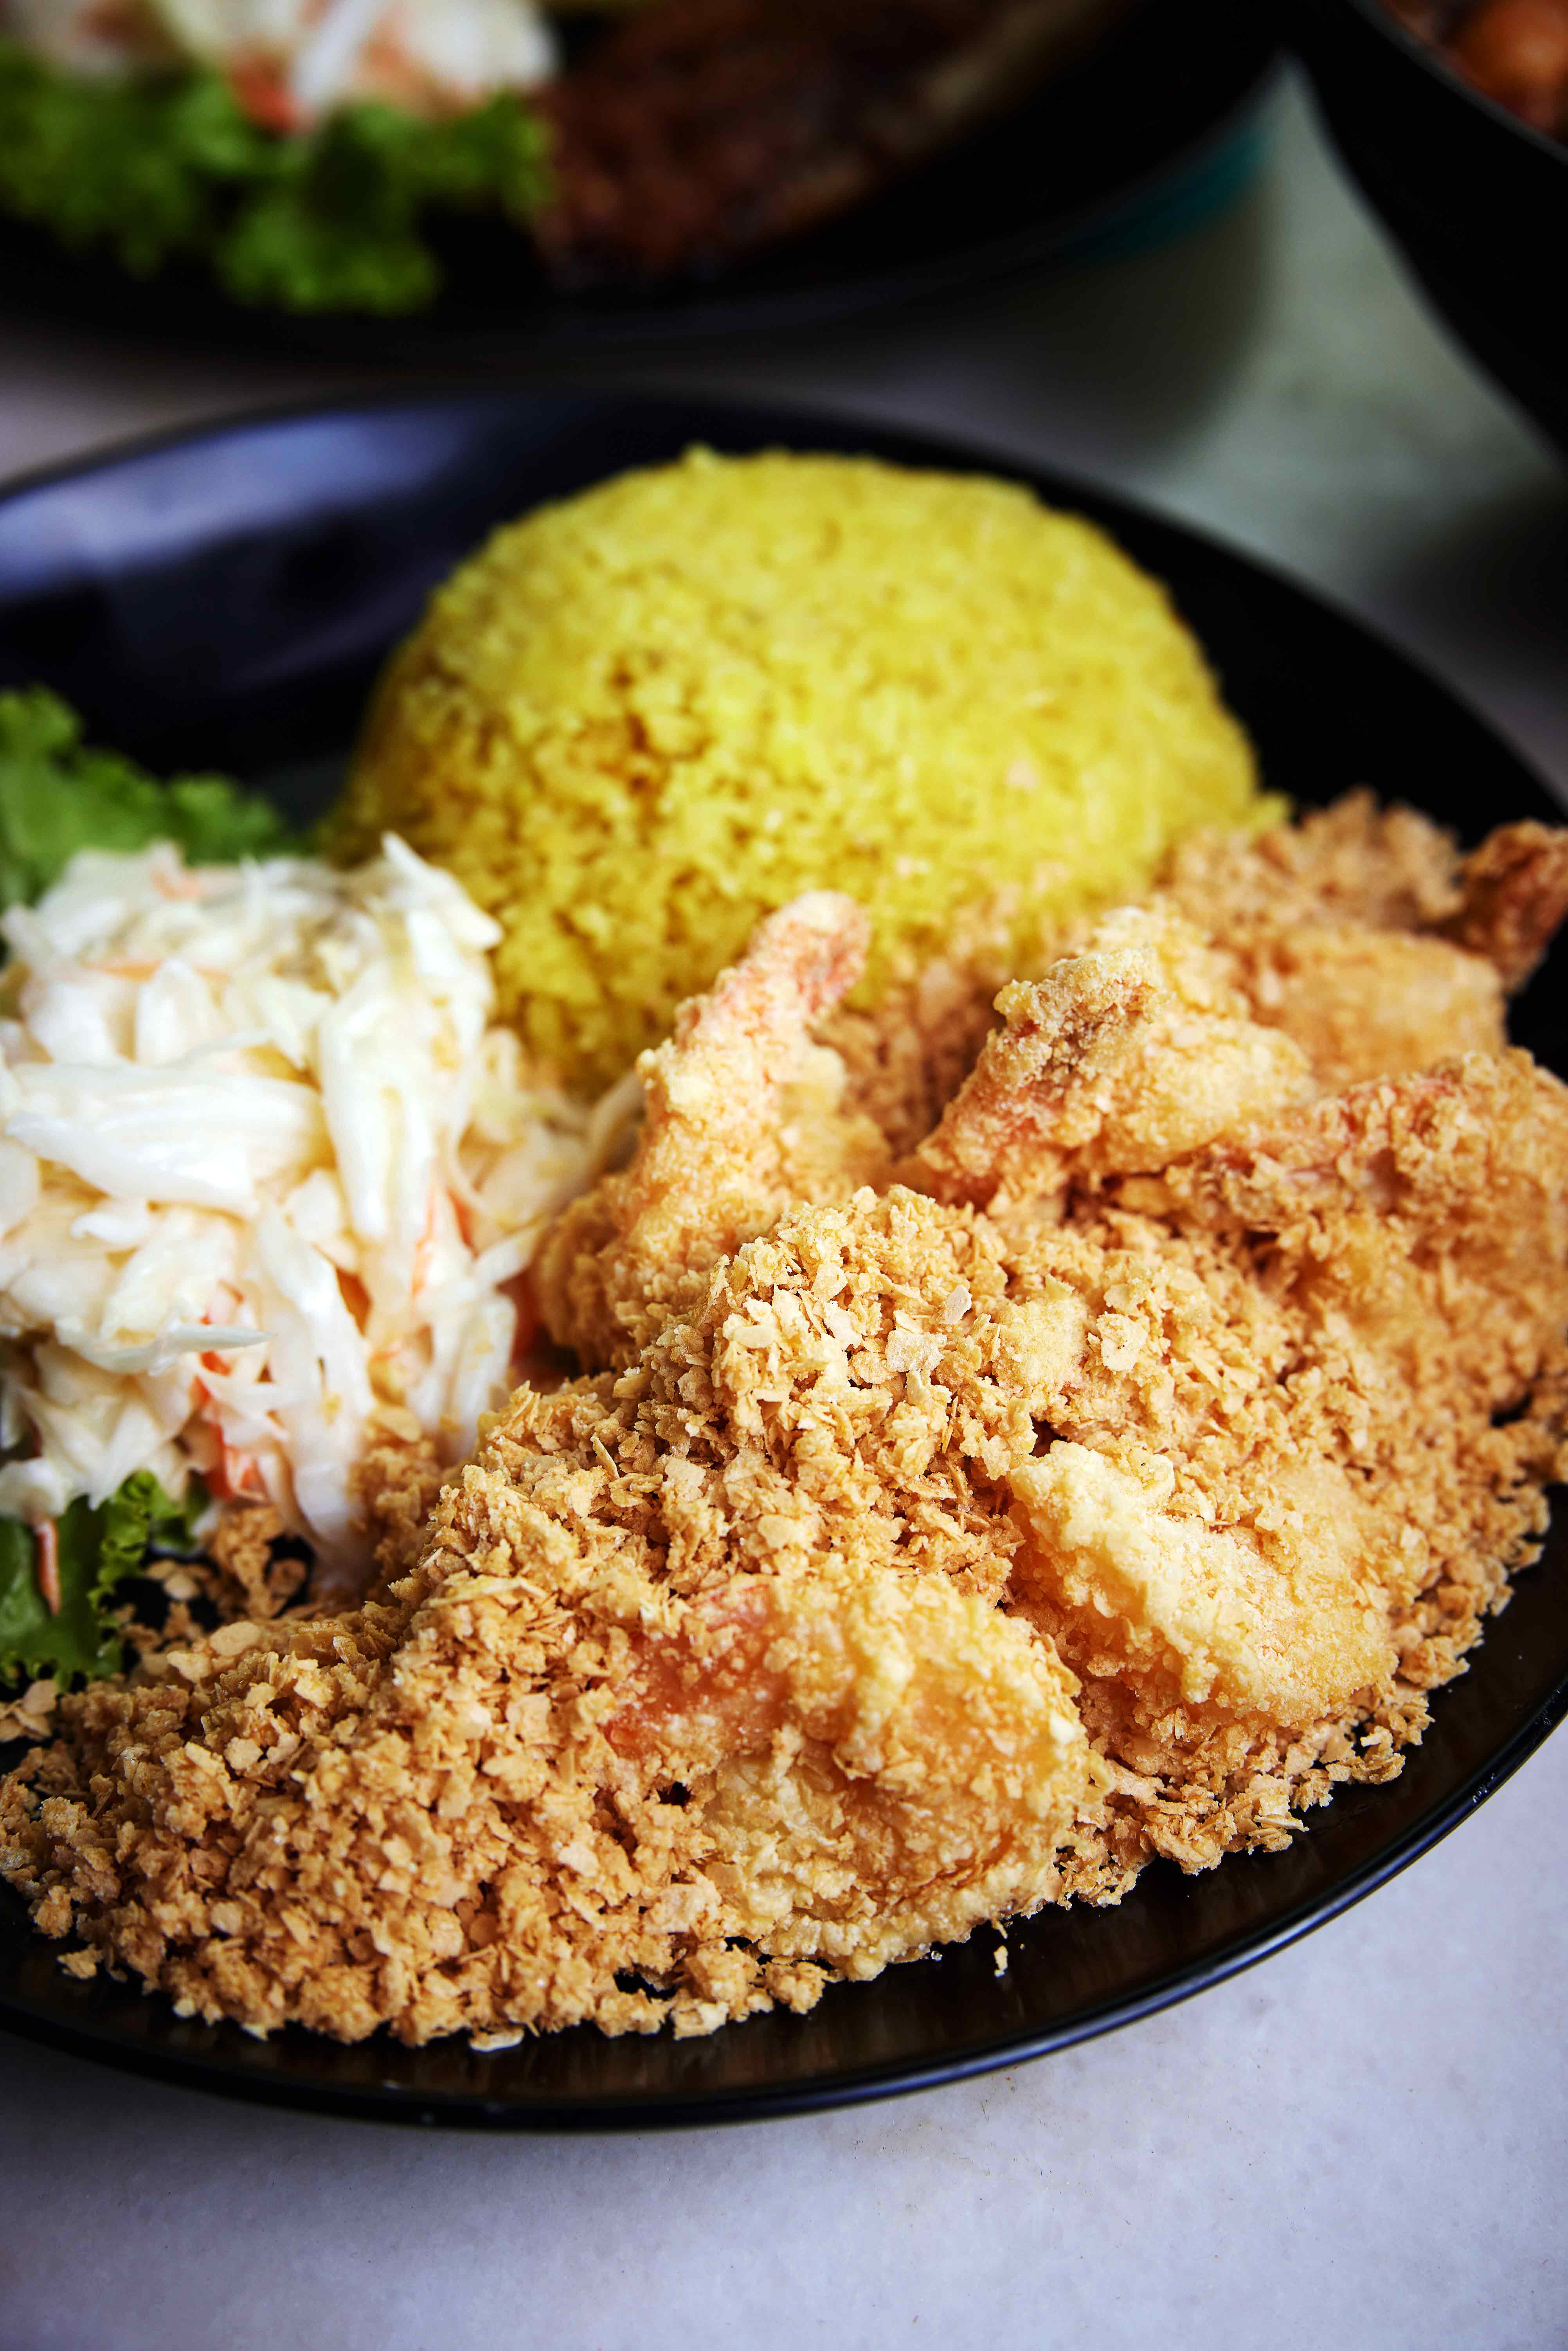 Cereal Prawn with Turmeric Rice, $7.90